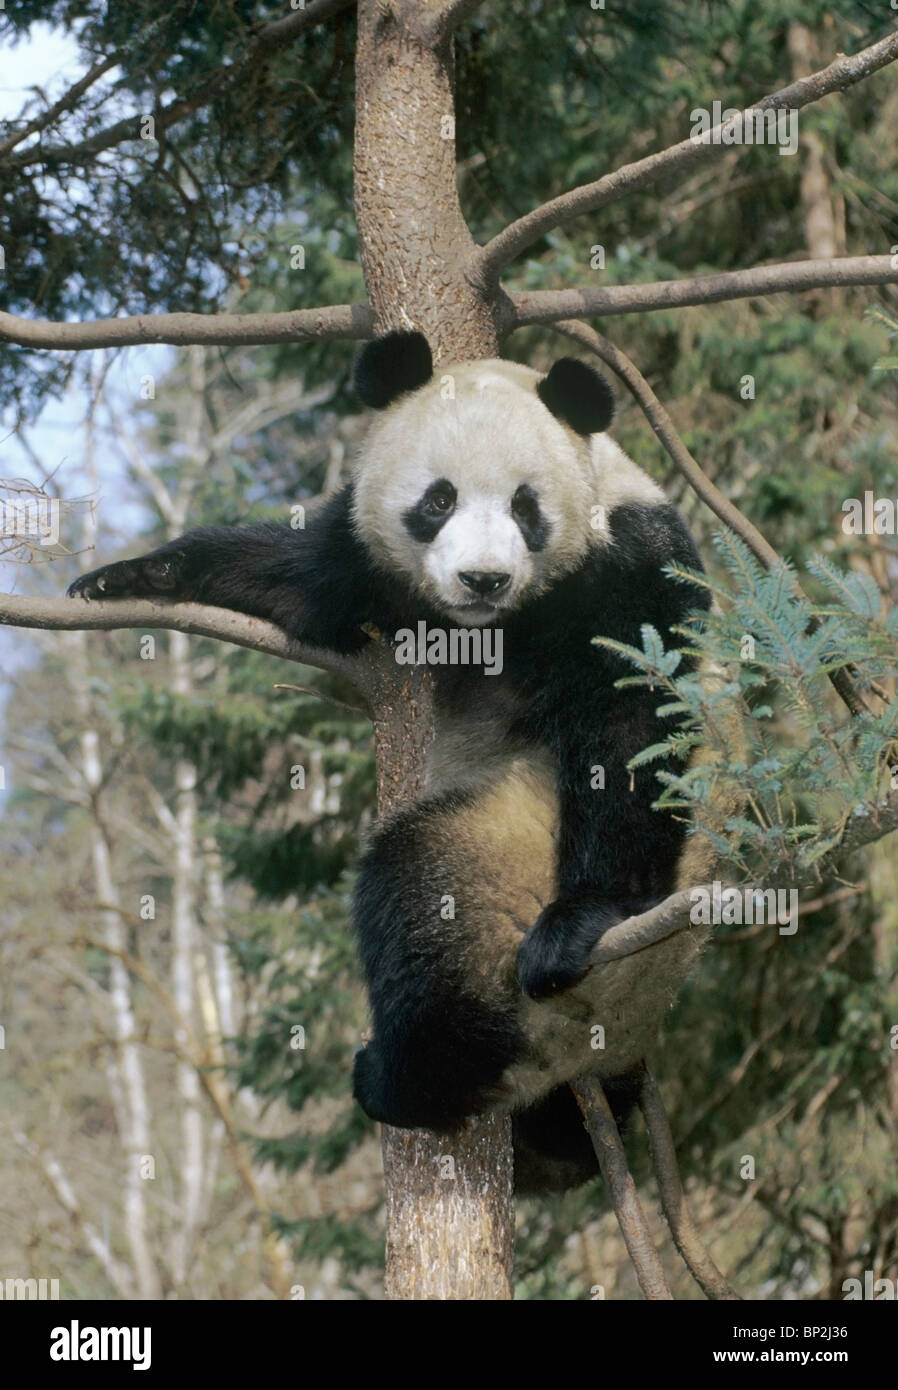 Giant panda rests in a tree, Wolong China Stock Photo